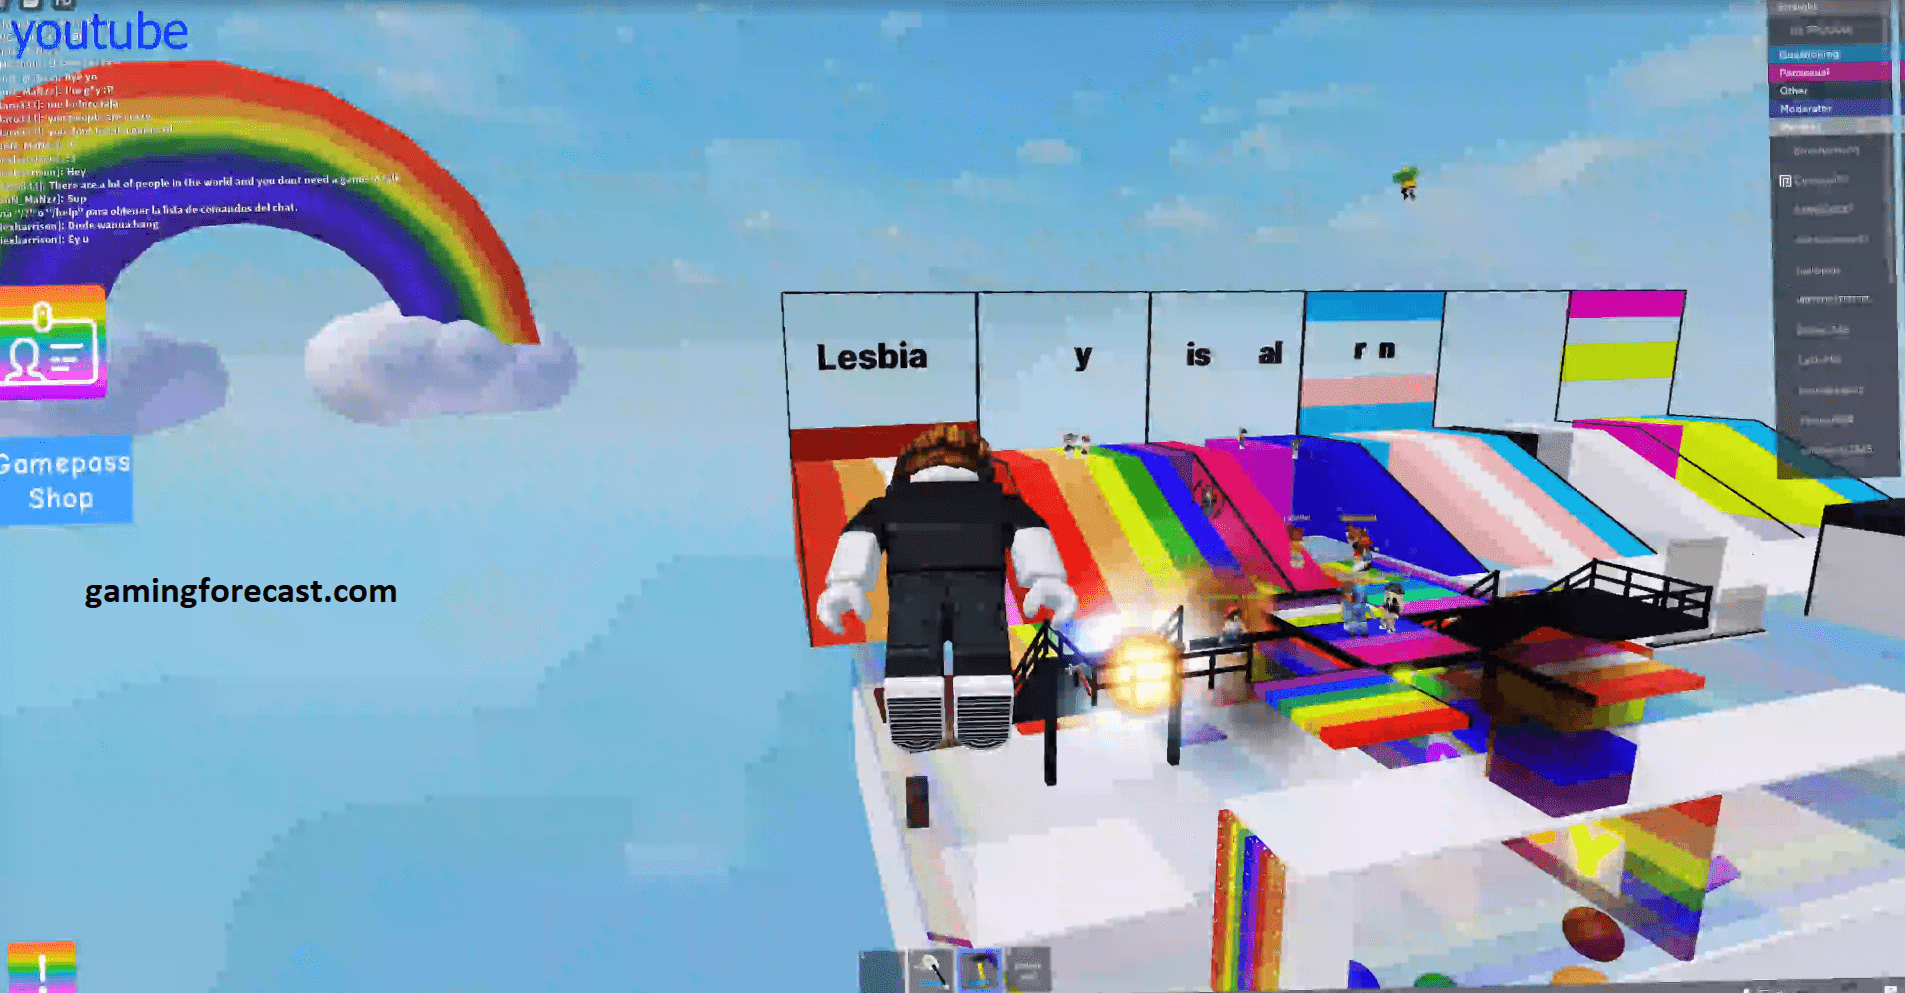 Roblox Hack Download Pc Destroy Lobby Fly Aimbot Scripts 2021 Gaming Forecast Download Free Online Game Hacks - hack do roblox download